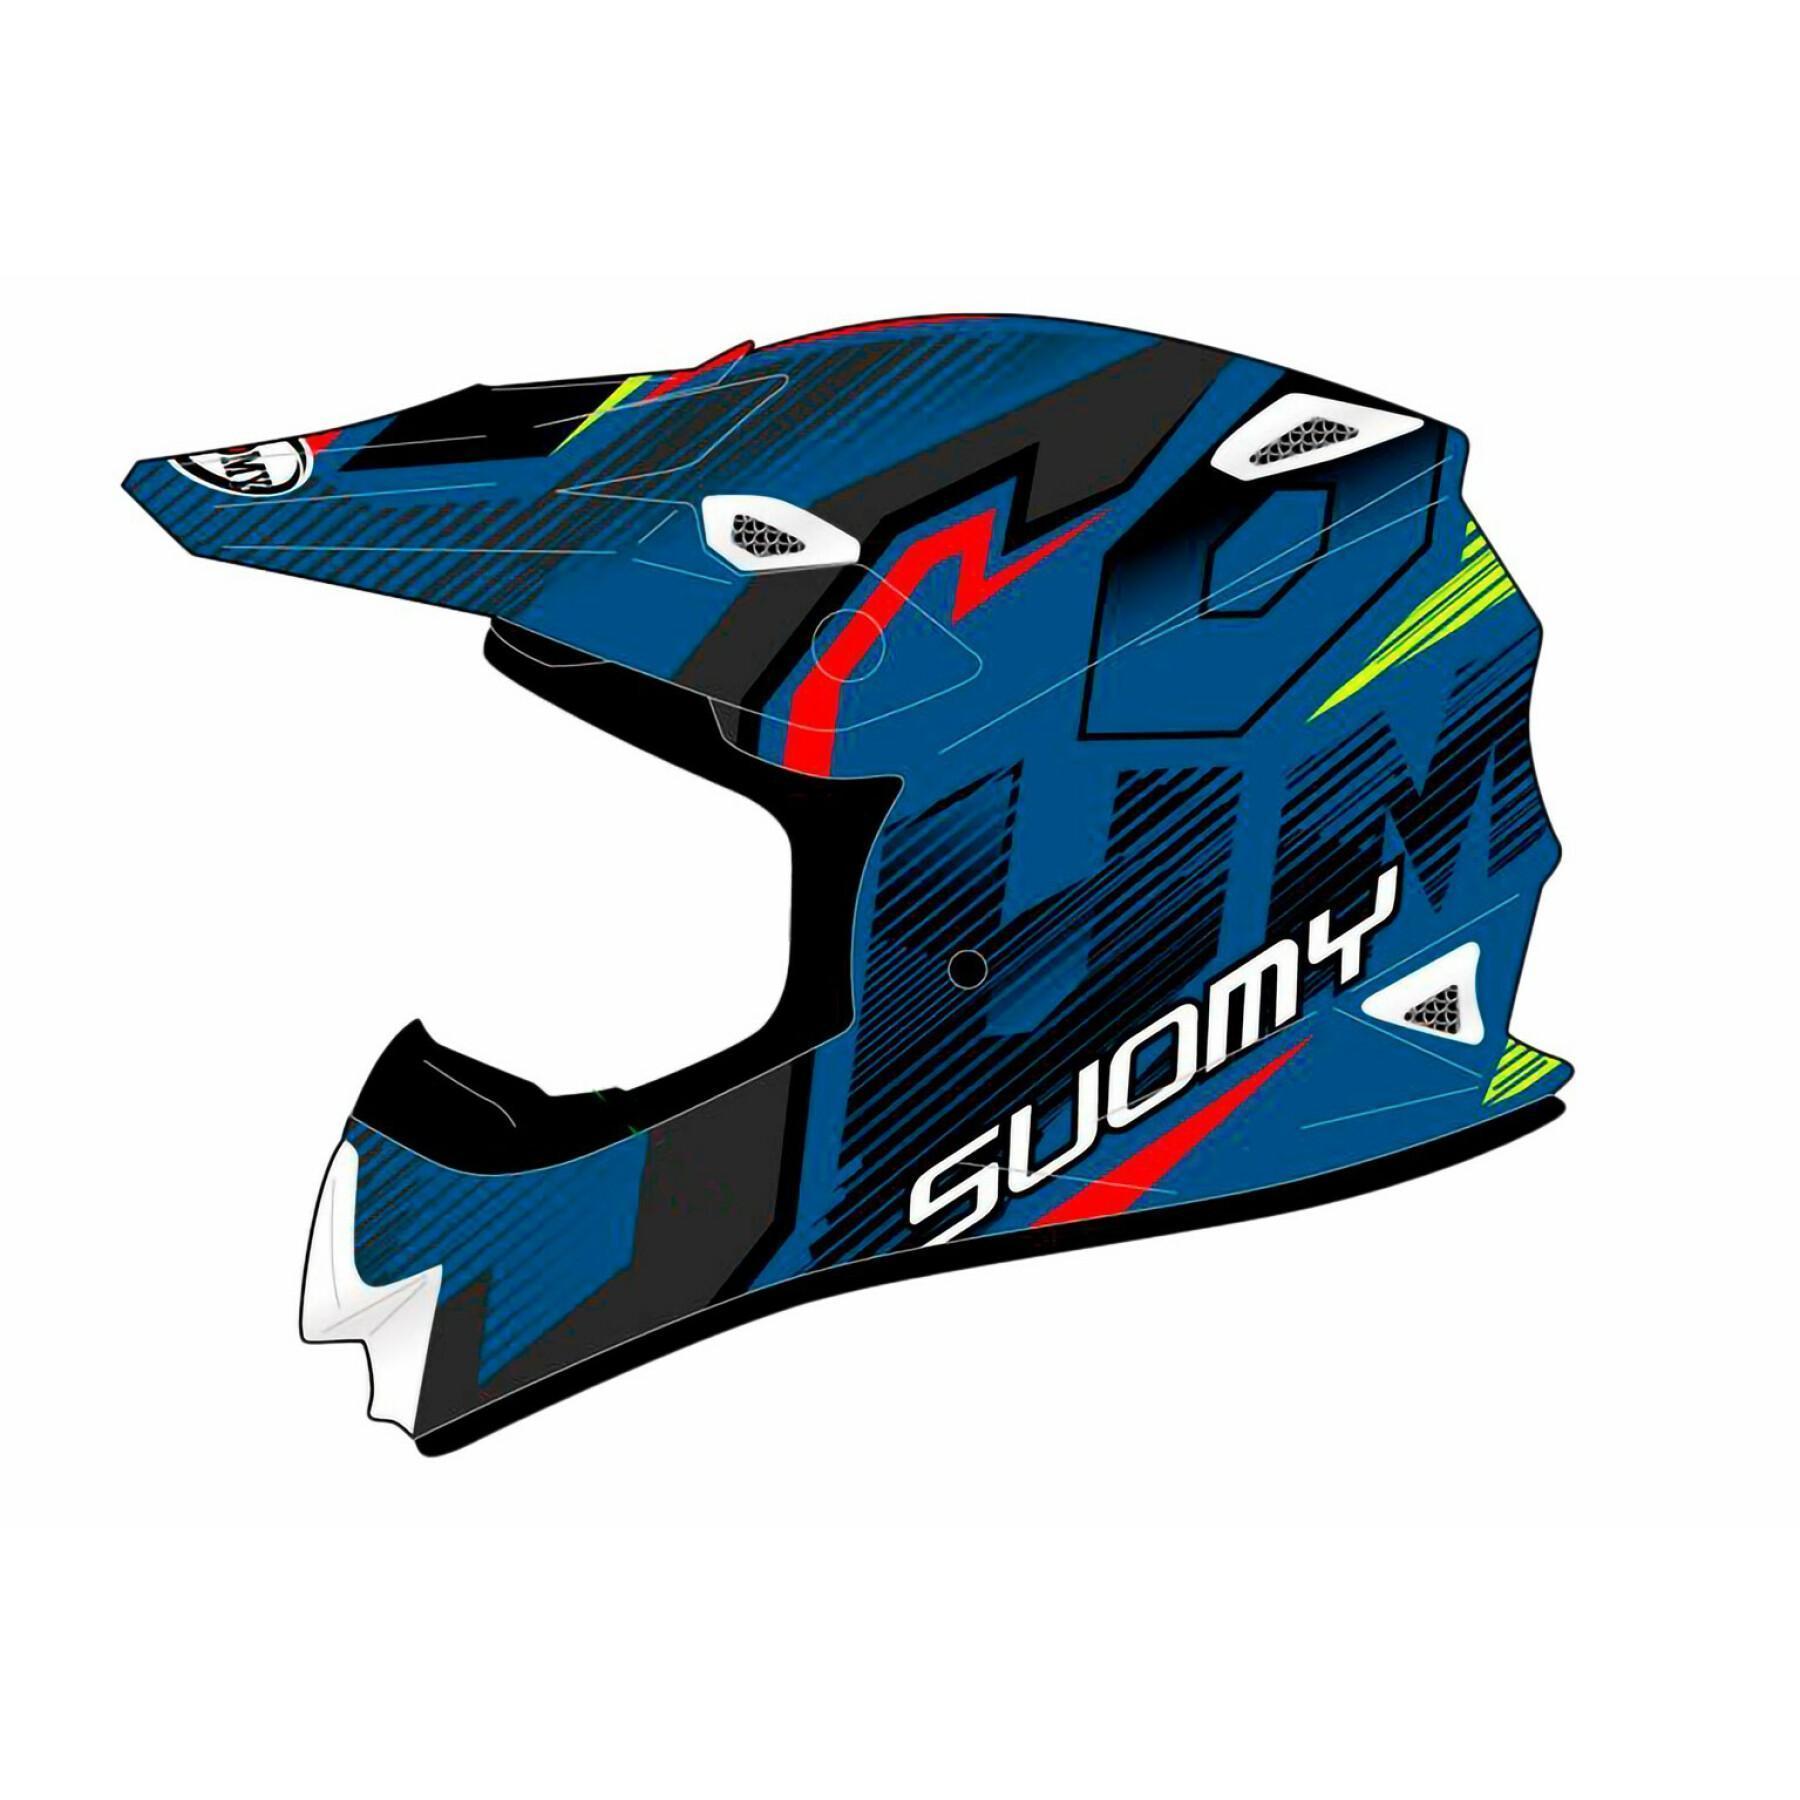 Casque cross Suomy mr jump unleashed